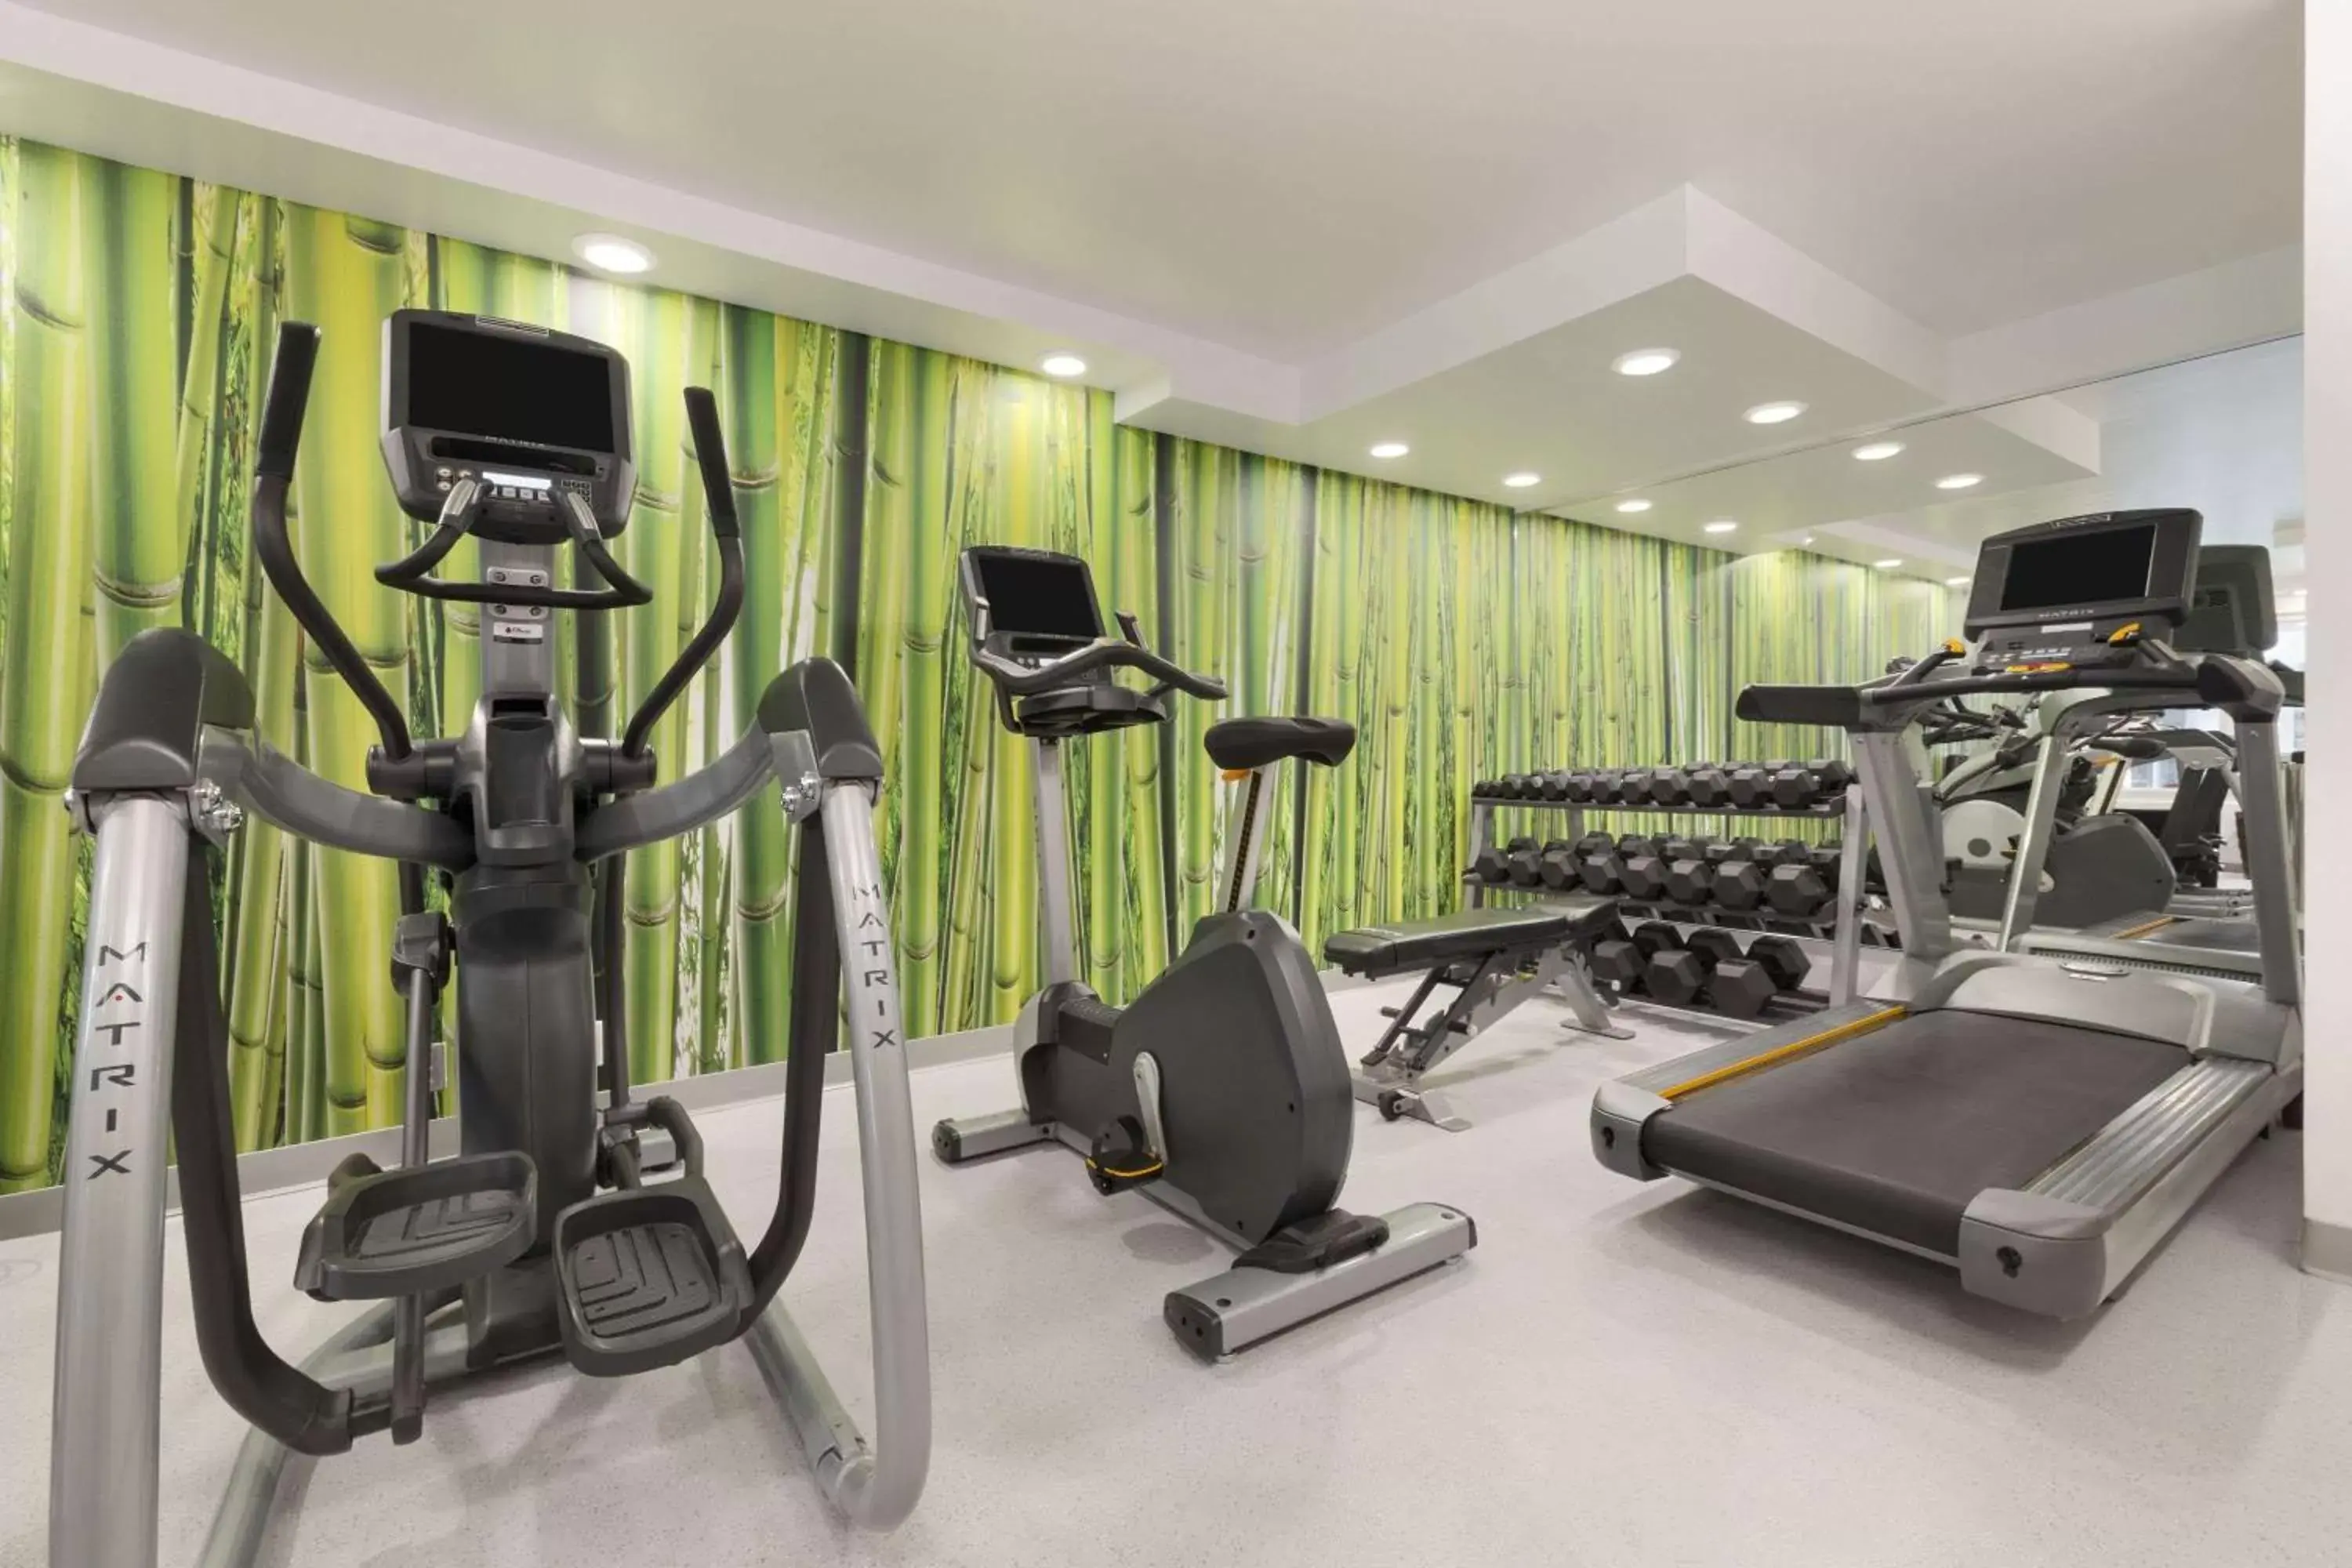 Fitness centre/facilities, Fitness Center/Facilities in The Atlas° Hotel